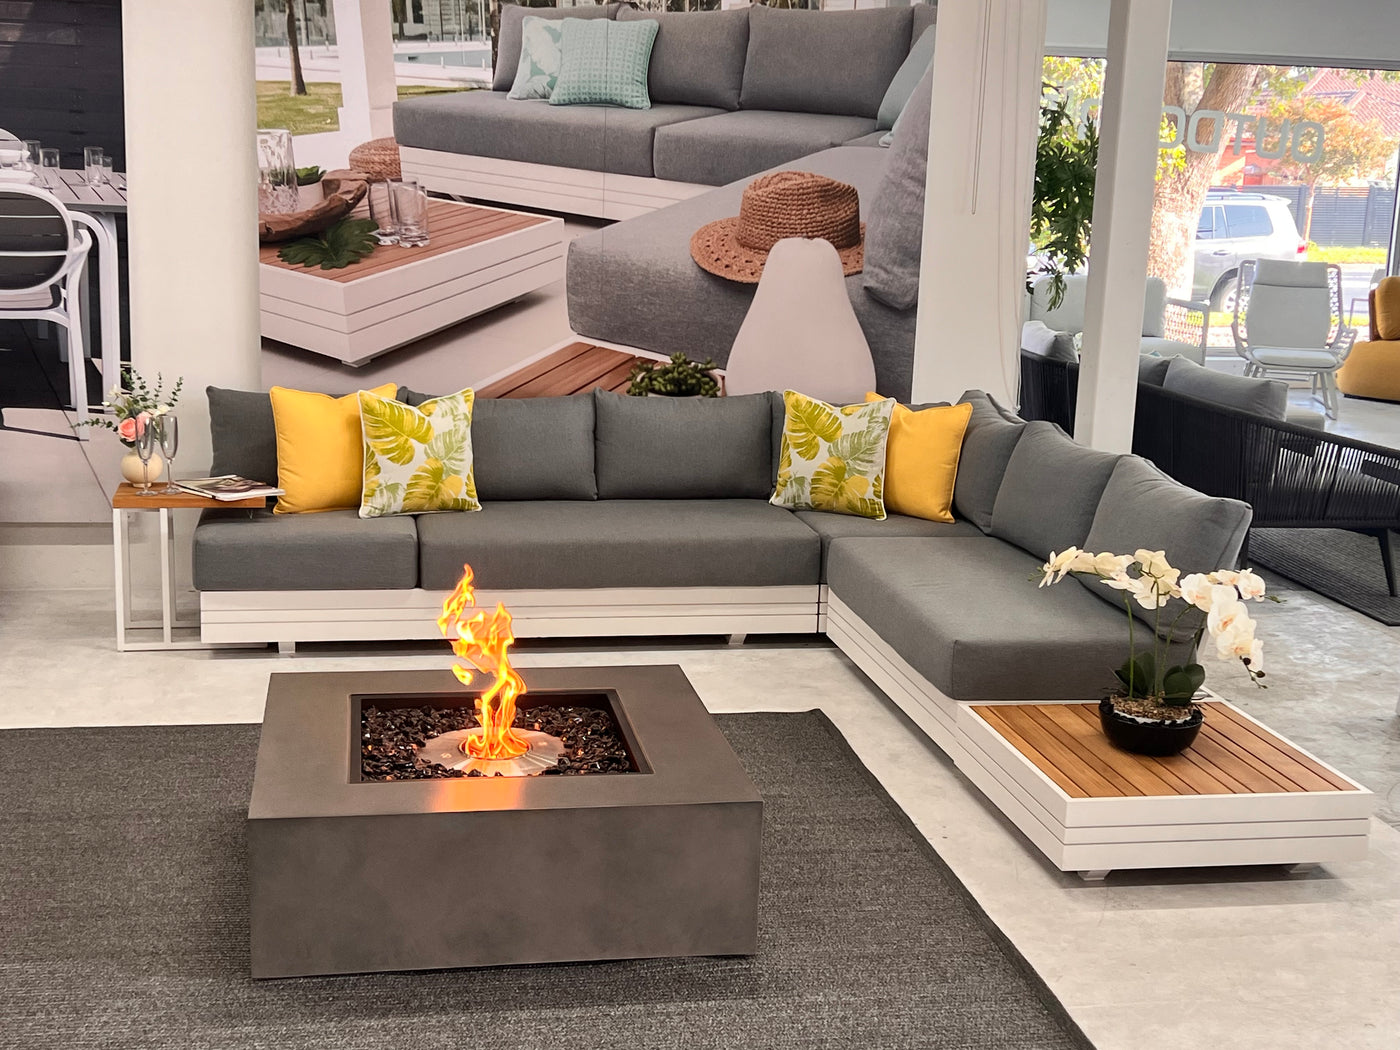 Moorabbin in store image of a lounge and firepit